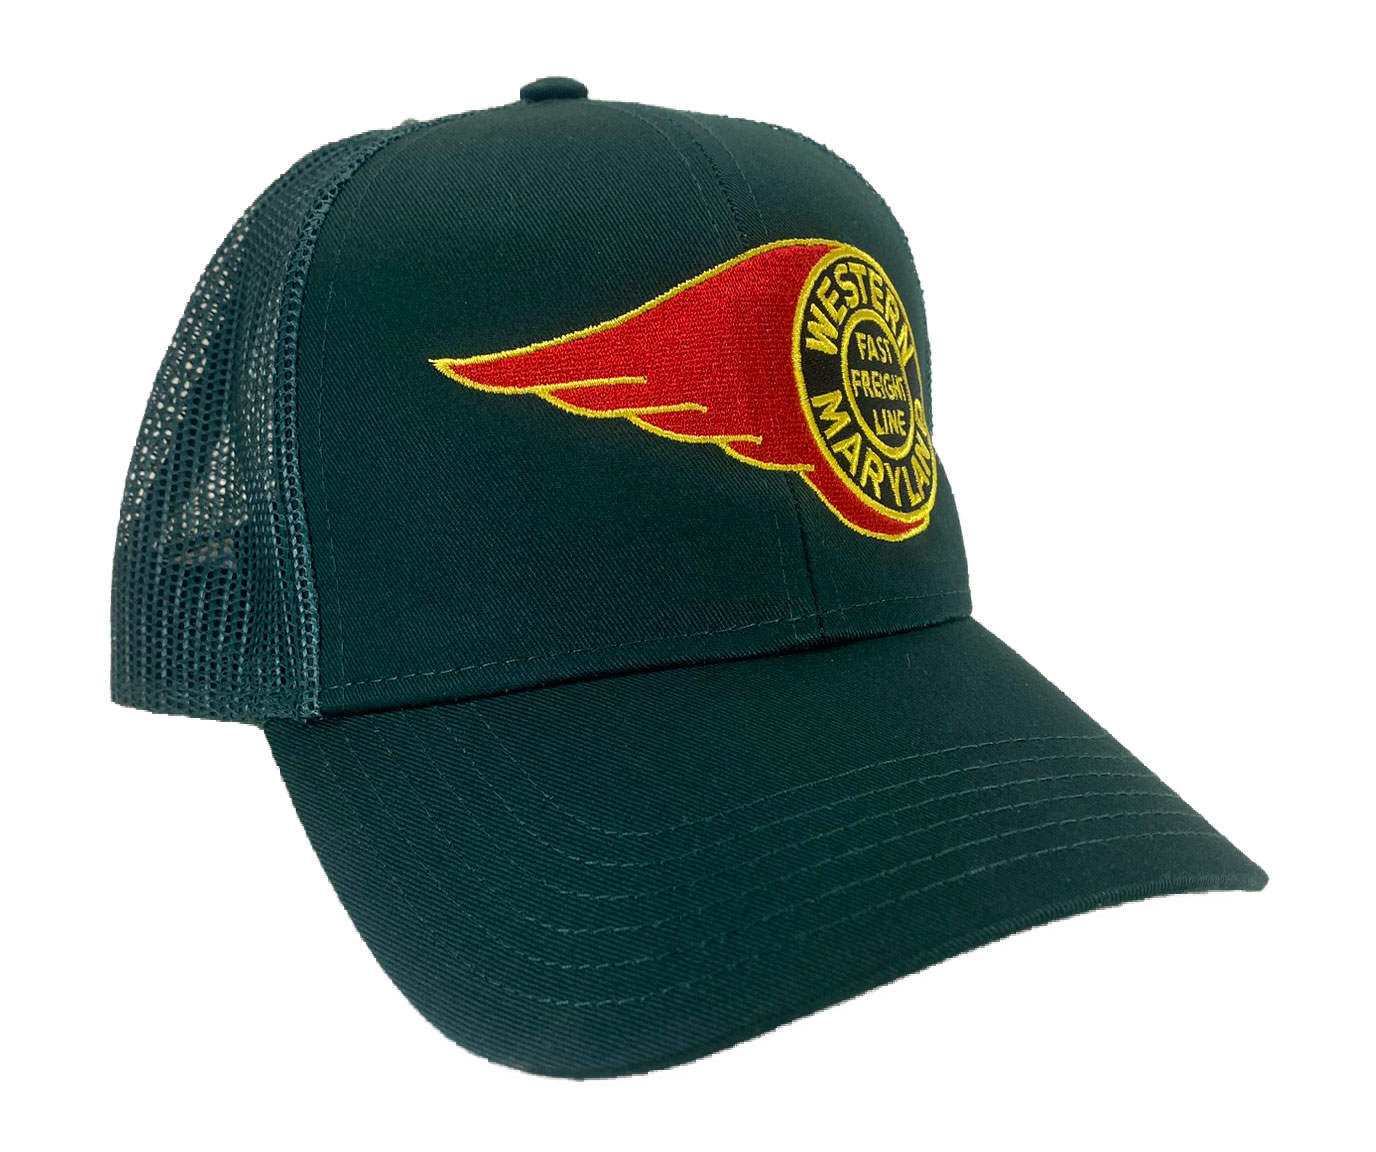 Western Maryland Railroad Fireball Embroidered Mesh Cap Hat #40-0063GM